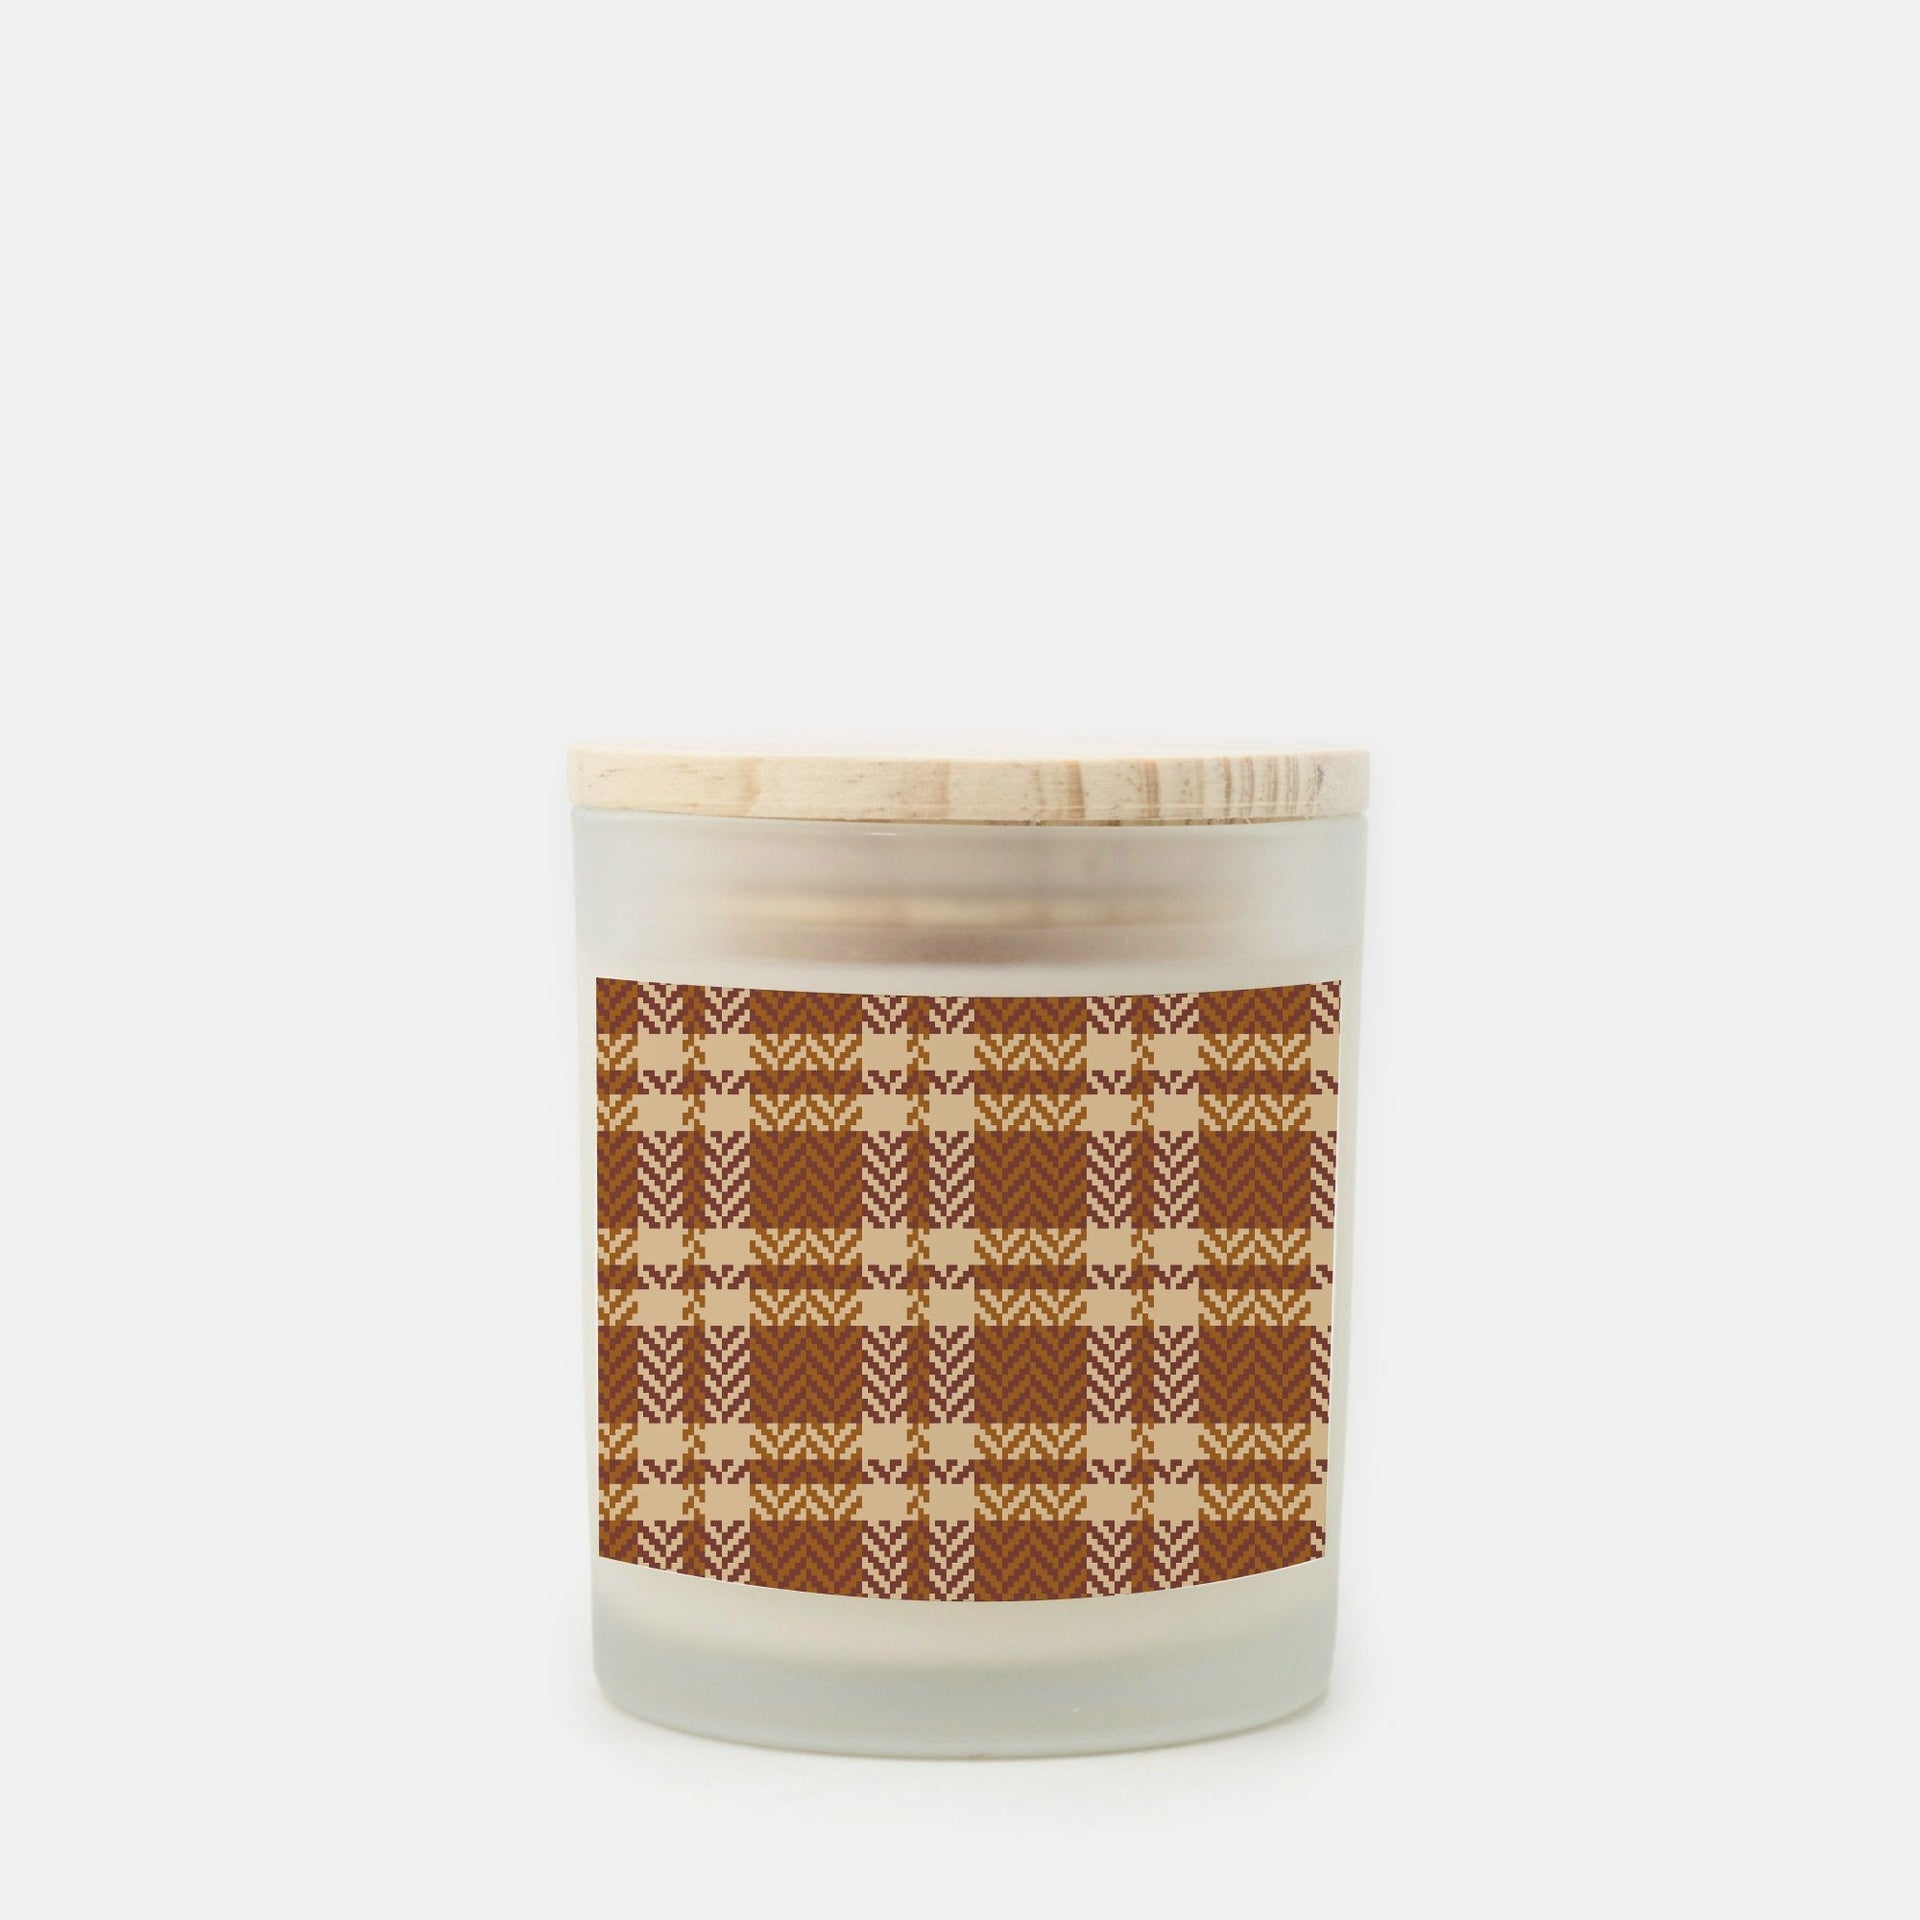 Lifestyle Details - 11oz Rust & Cream Plaid Frosted Glass Candle - Cashmere Vanilla